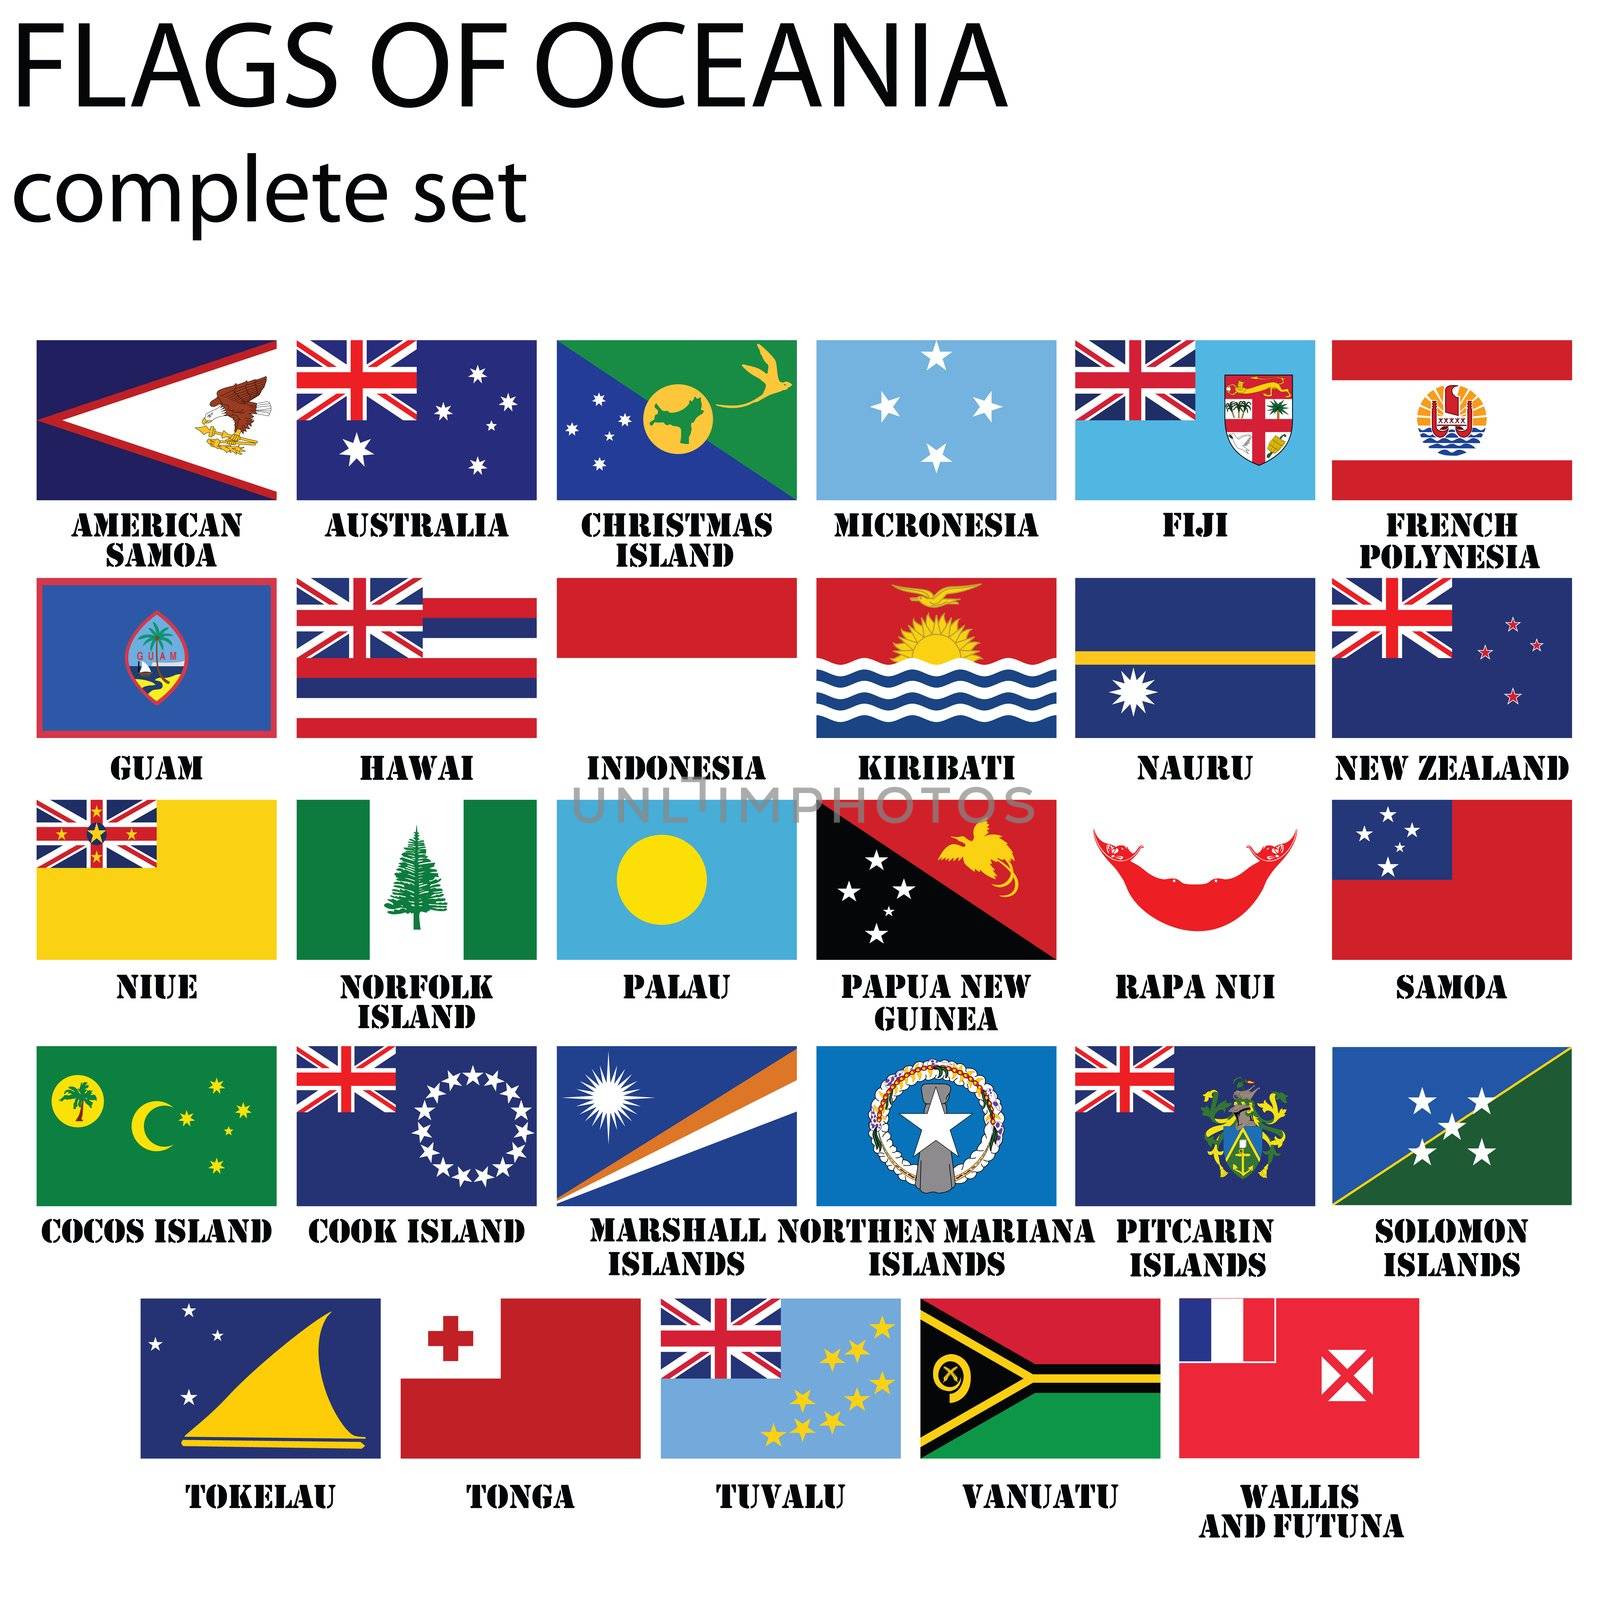 Flags of Oceania by Lirch